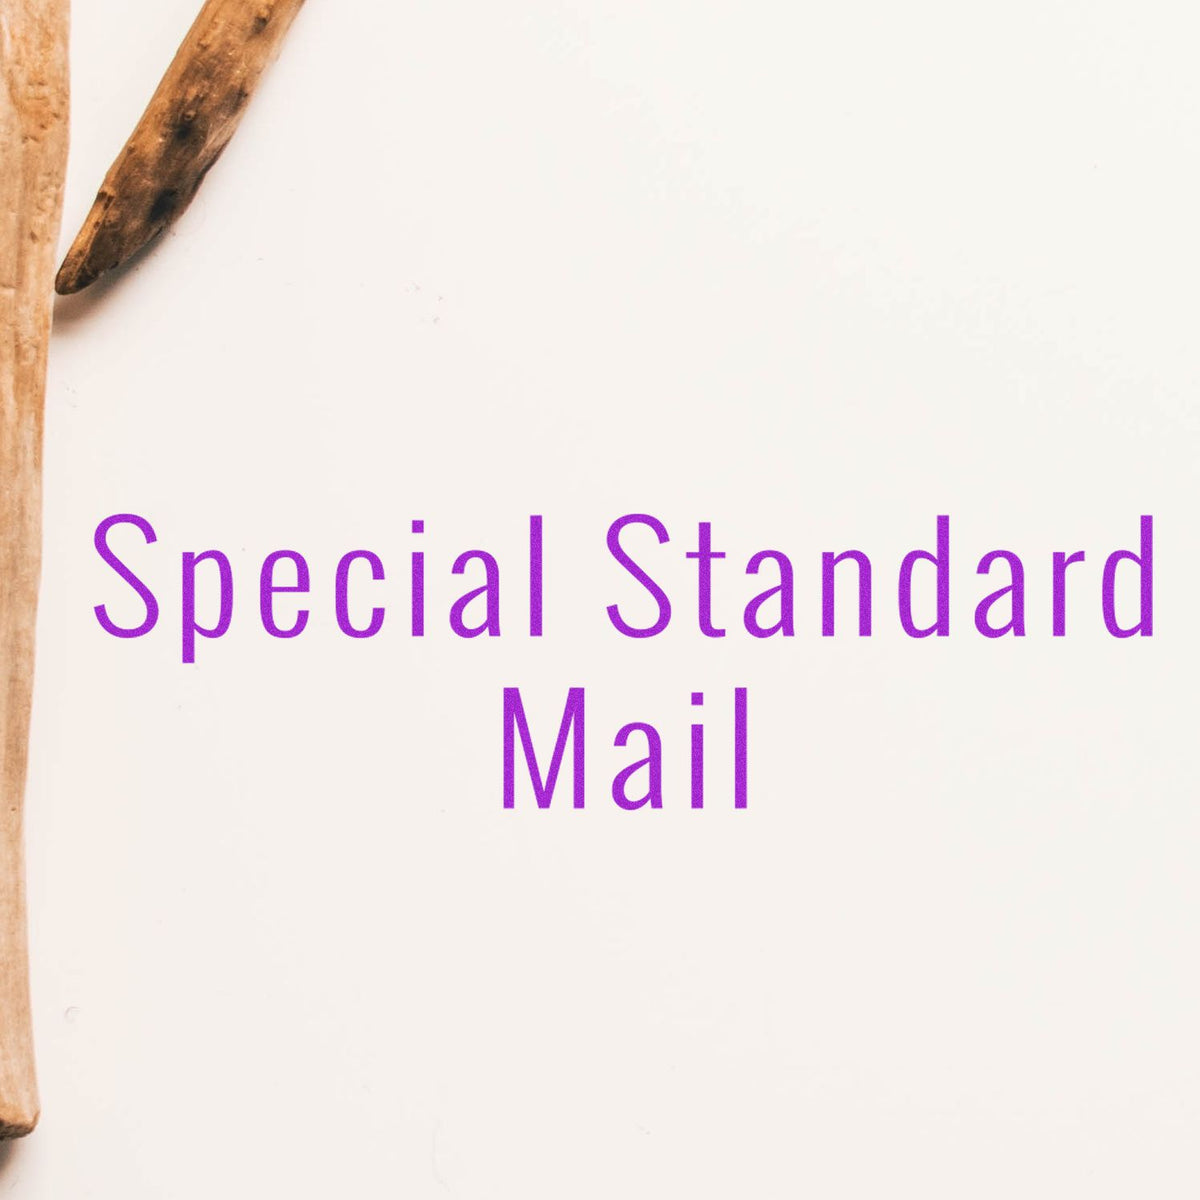 Special Standard Mail Rubber Stamp In Use